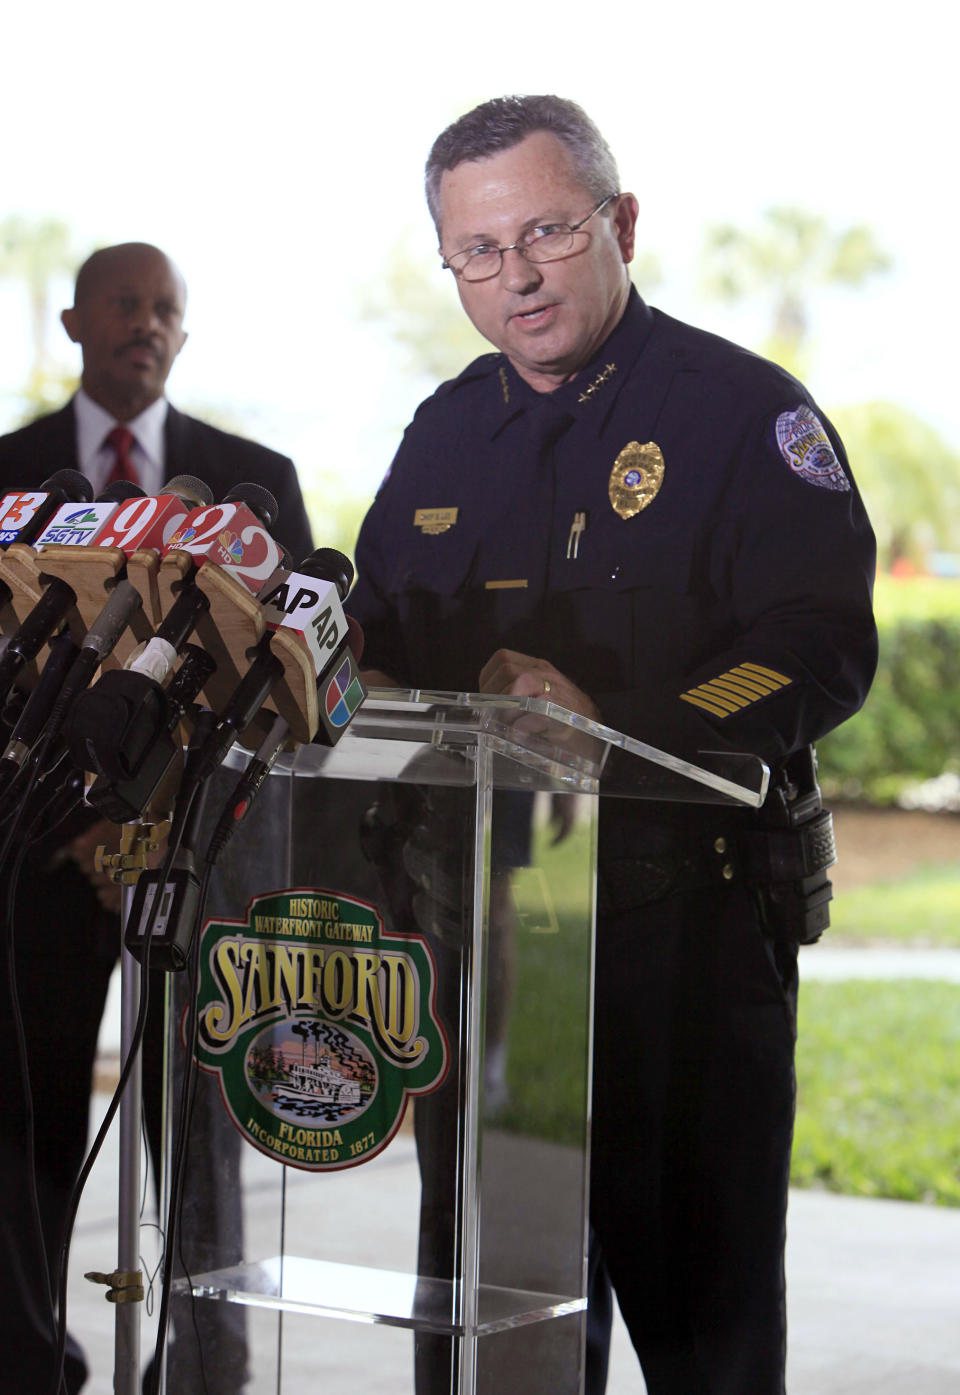 <strong>March 22, 2012</strong> -- Sanford Police Chief Bill Lee holds a press conference and announces he is temporarily stepping down as police chief because his presence is a "distraction."  State Attorney Norm Wolfinger recuses himself from the case and Florida Gov. Rick Scott announces that another state attorney, Jacksonville-based Angela Corey, will be replacing Wolfinger as special prosecutor in the investigation.  Meanwhile, Rev. Al Sharpton, Martin Luther King III and other civil rights leaders and politicians hold a justice rally at Sanford's Fort Mellon Park. They demand an arrest in Martin's shooting. An estimated 10,000 people attend the event.